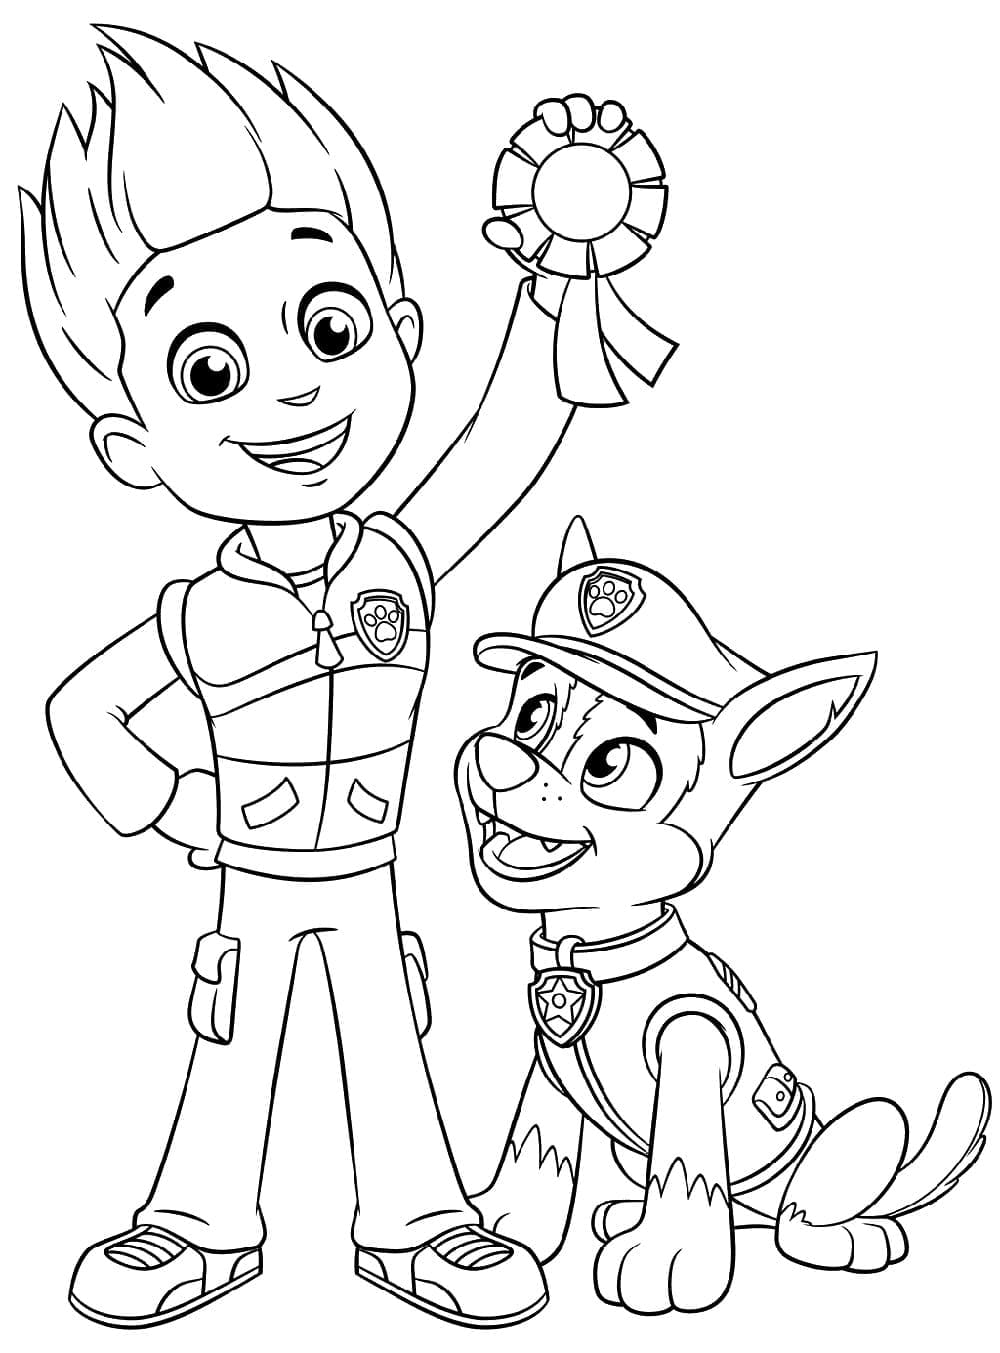 Ryder and chase in paw patrol coloring page